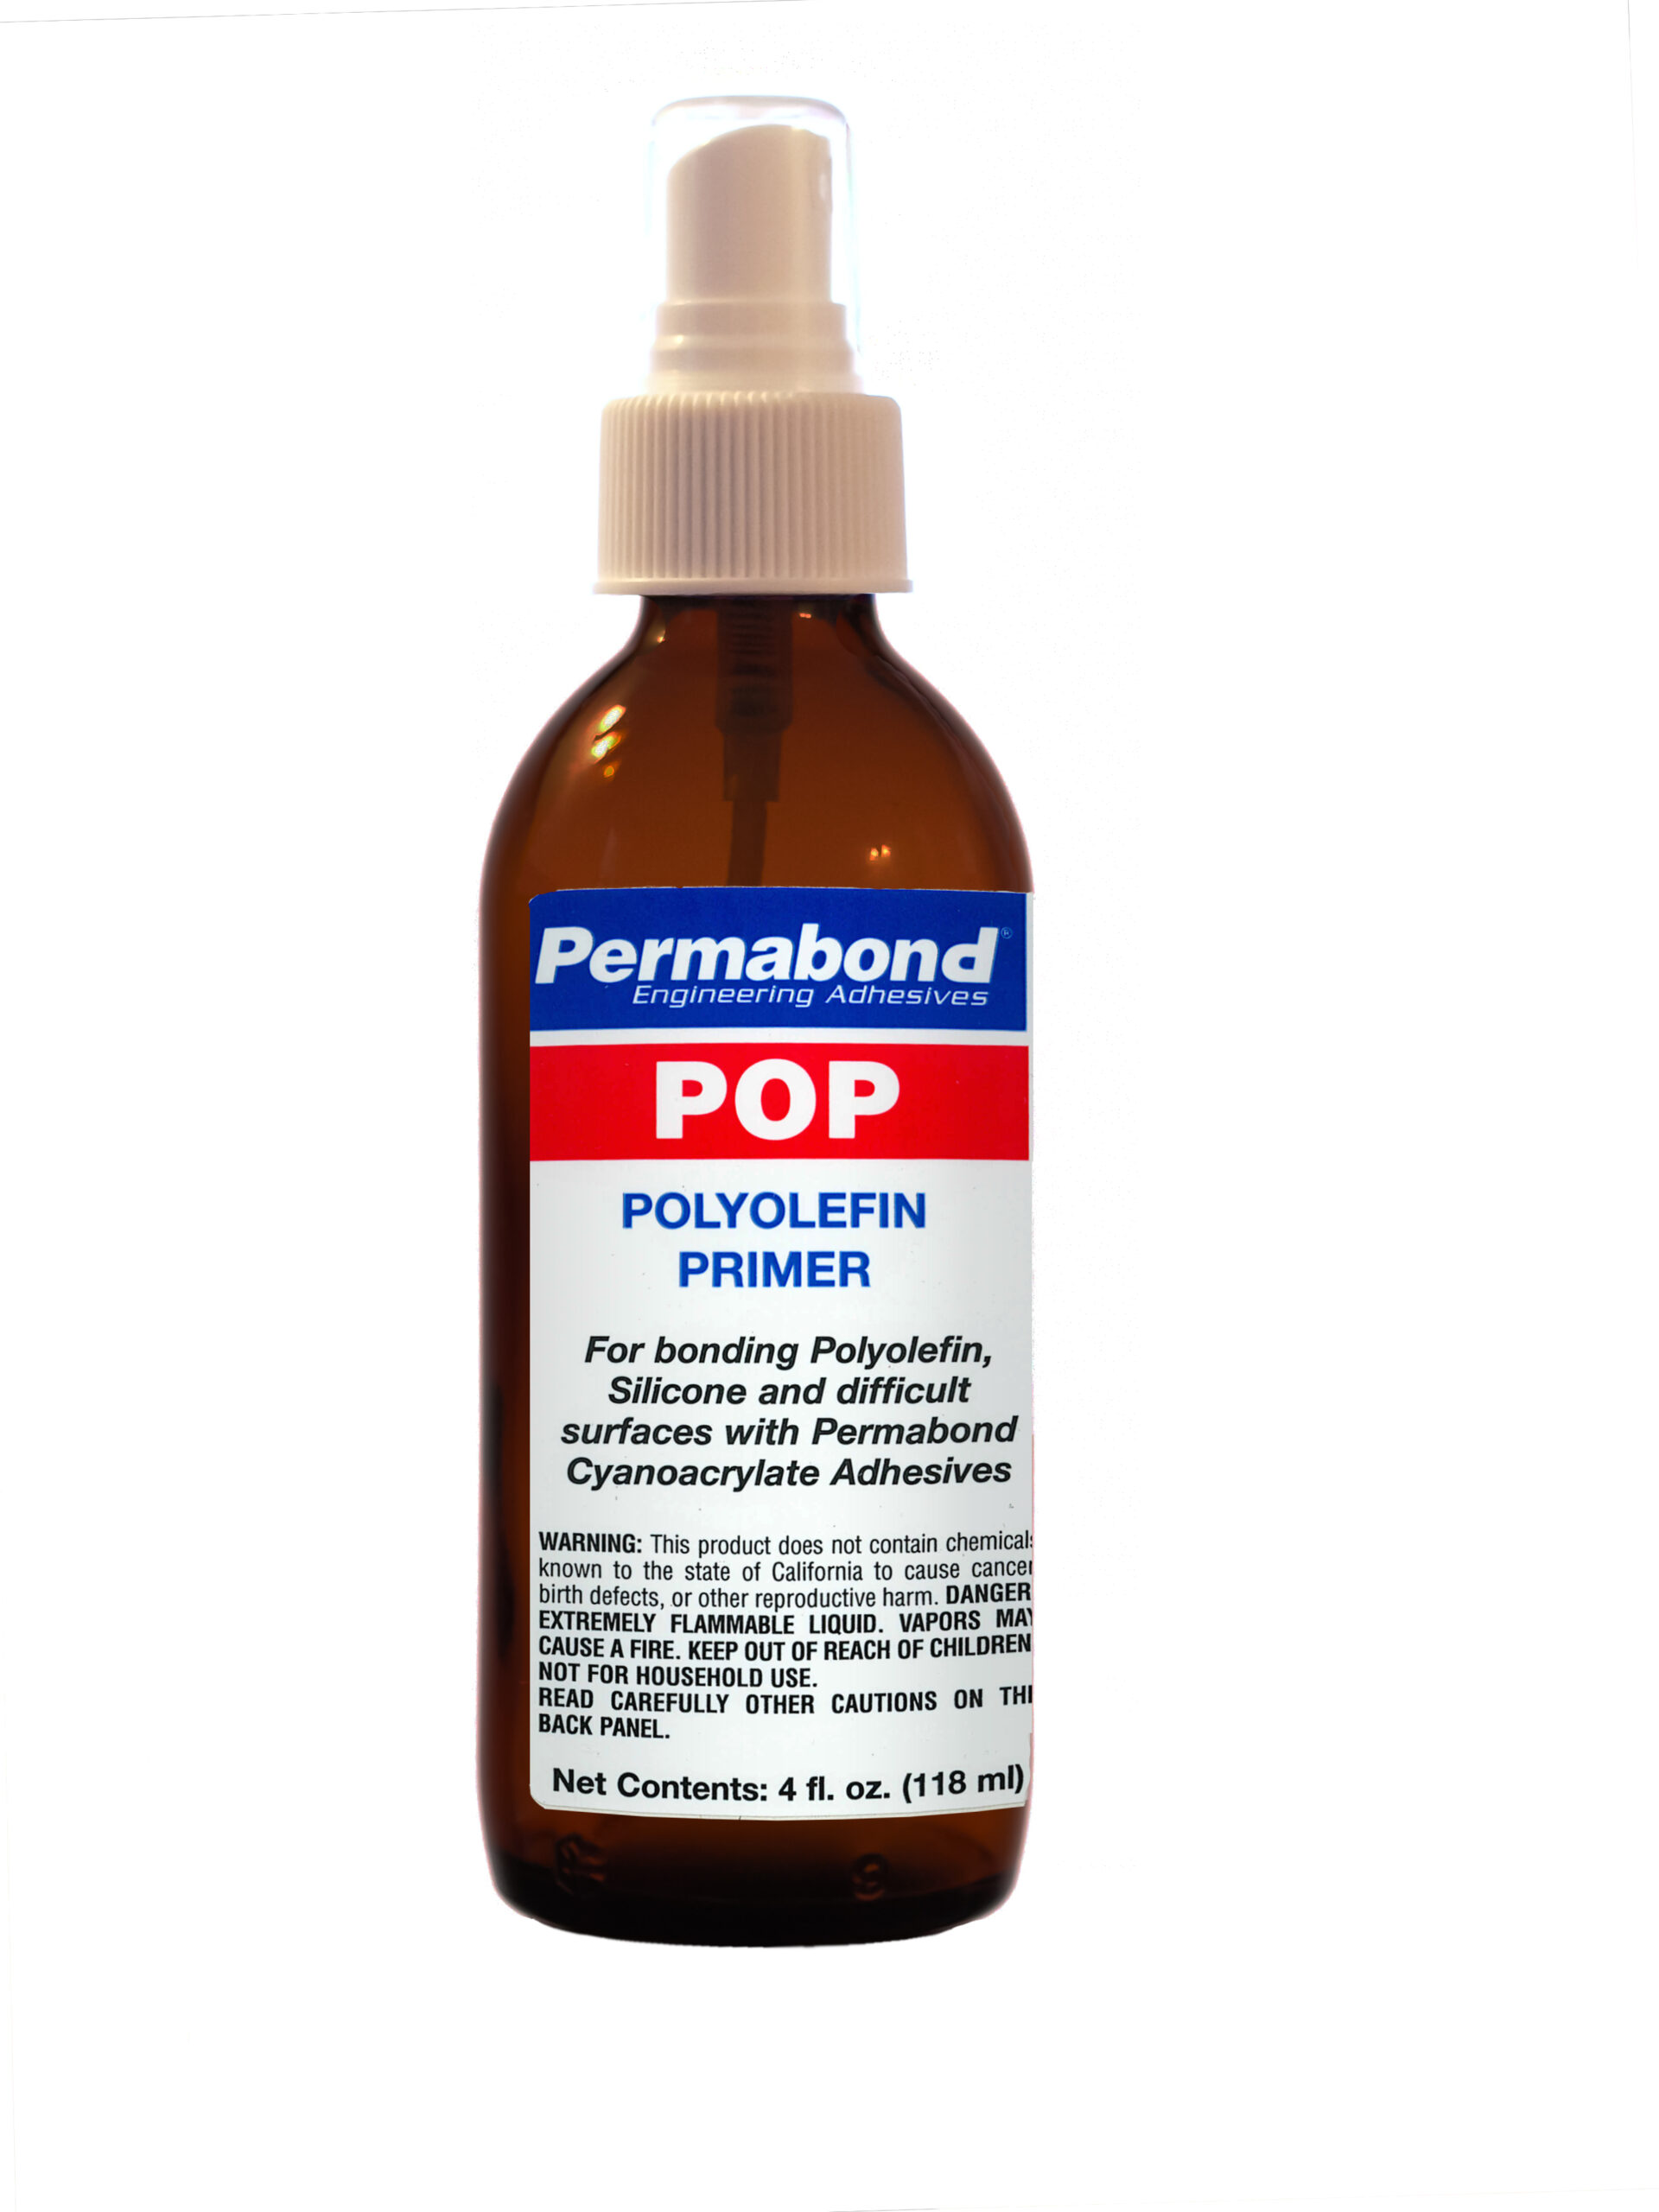 https://www.permabond.com/wp-content/uploads/2022/11/new-glass-w-spayer-002-scaled.jpg